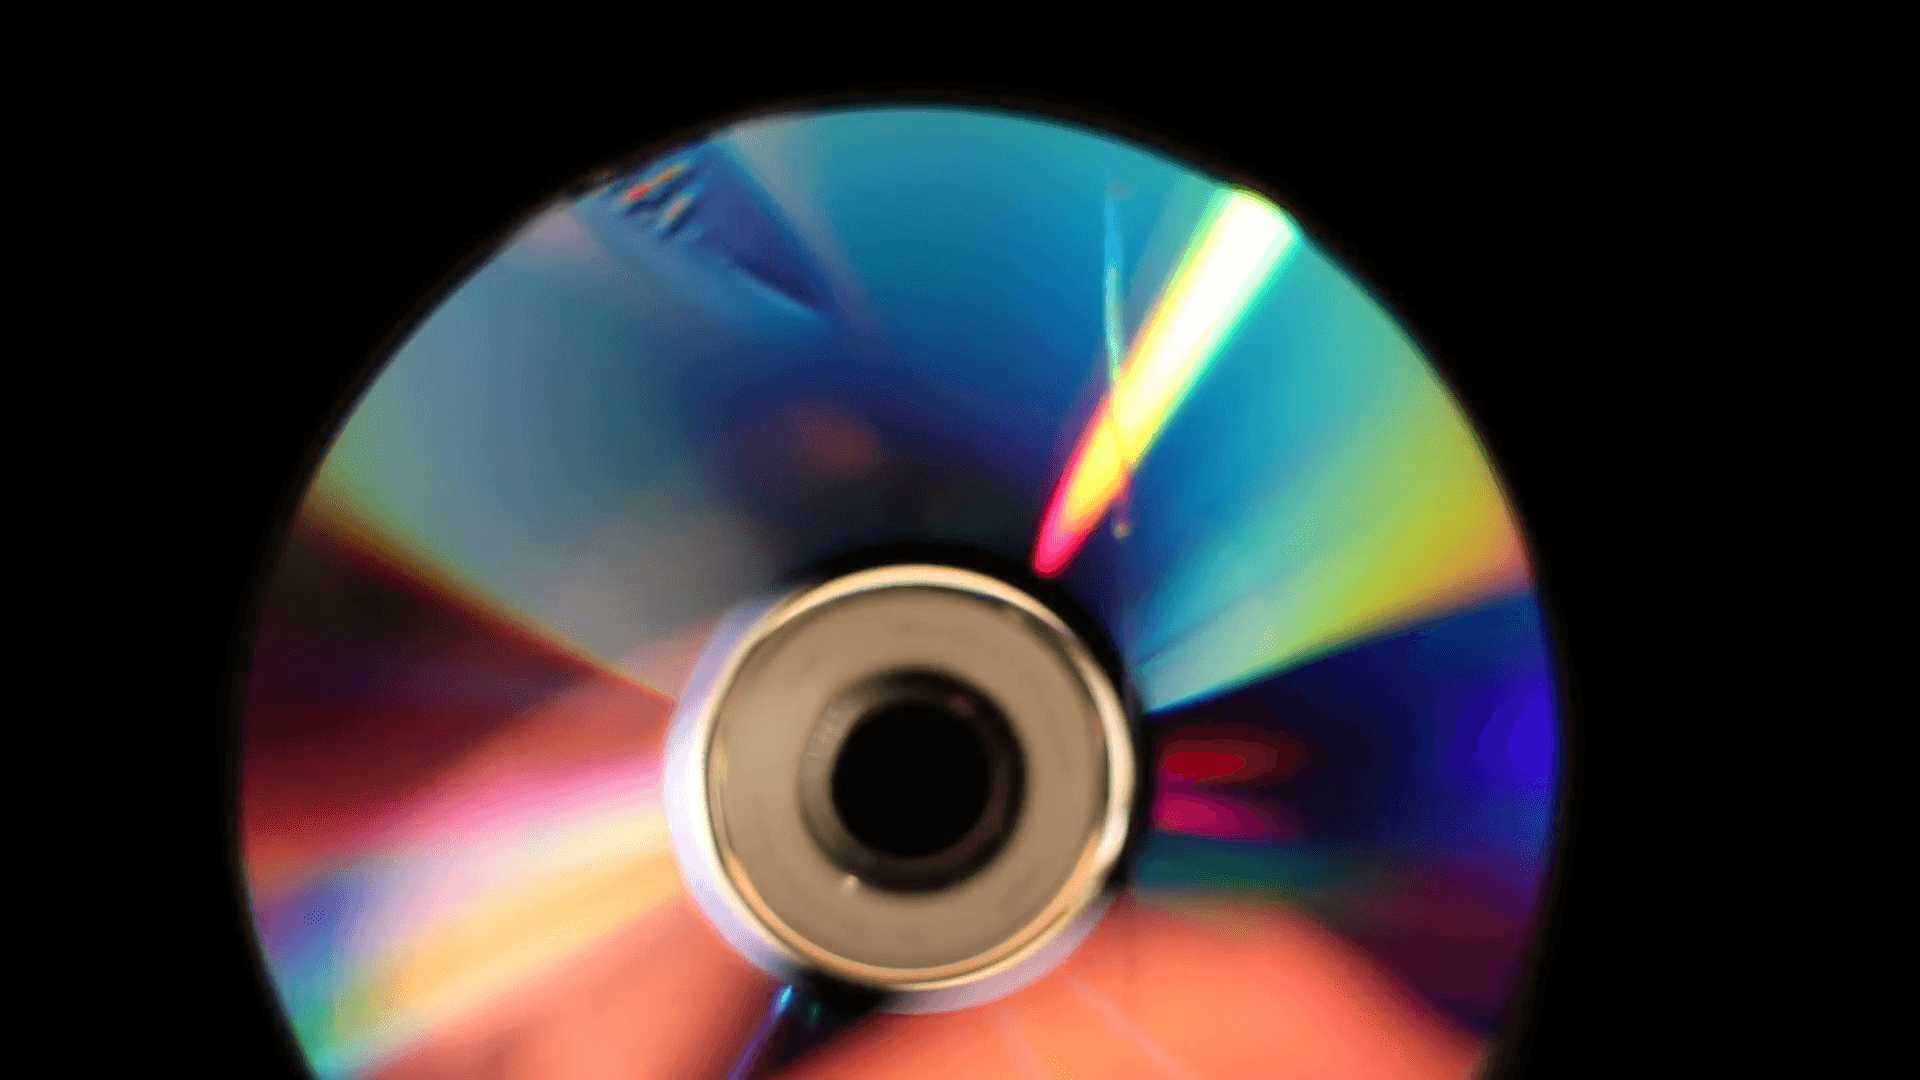 Melting CD / DVD with Heat on Black Background Stock Video Footage